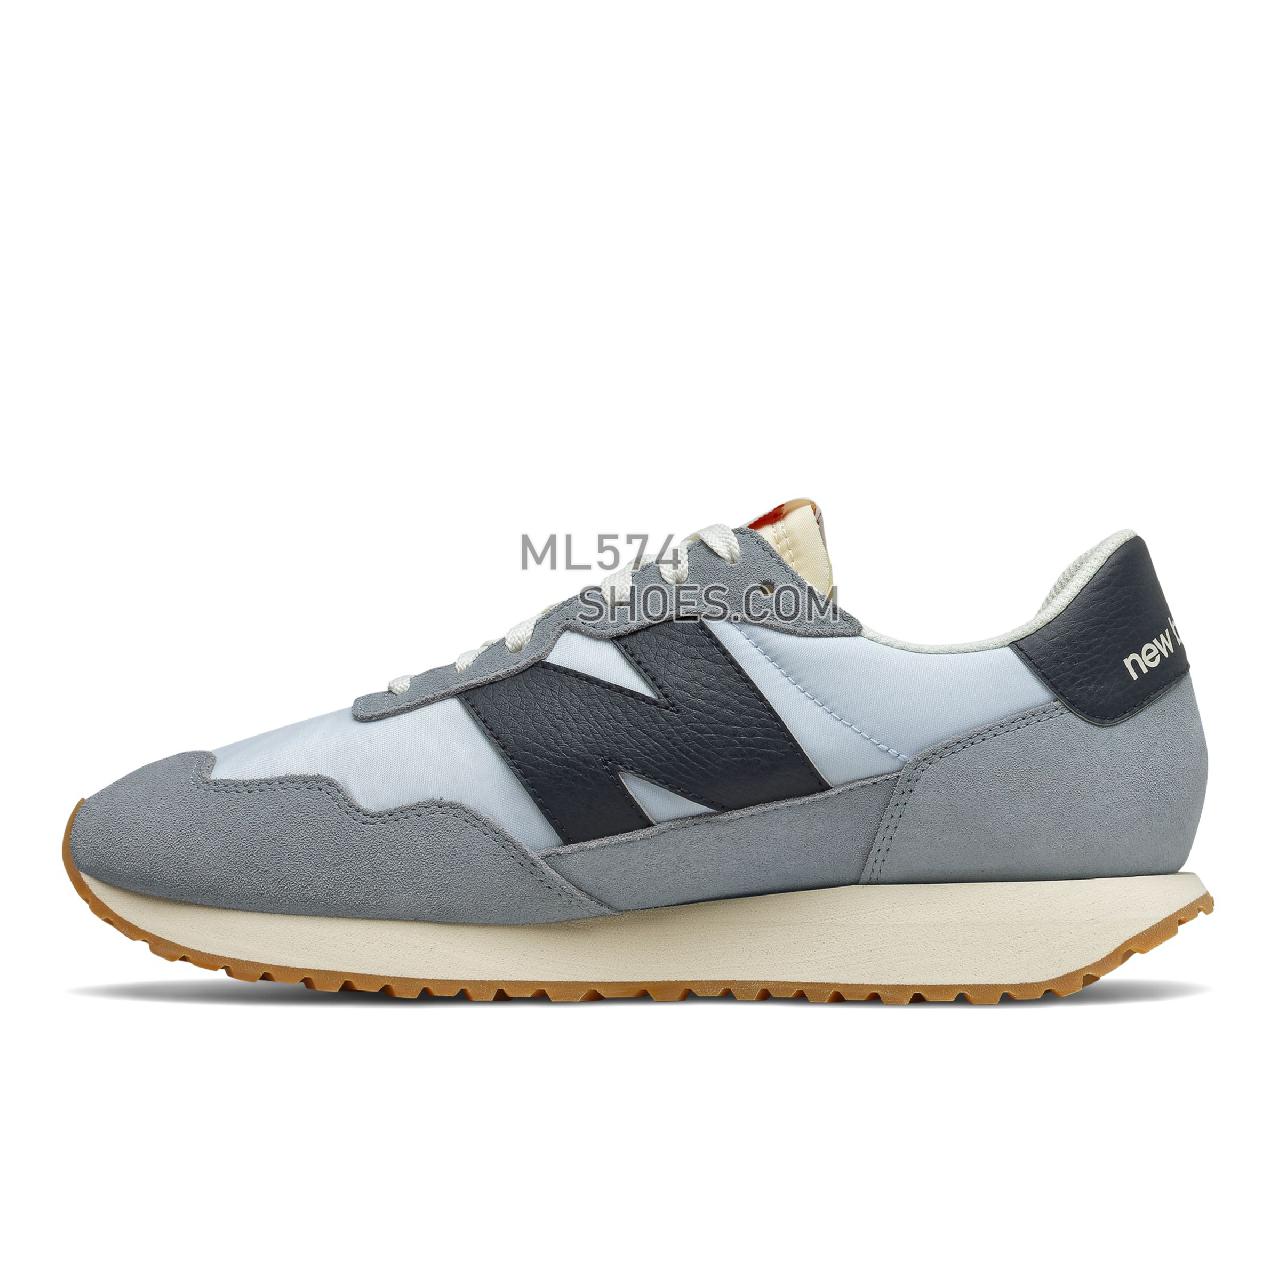 New Balance 237 - Men's Classic Sneakers - Reflection with Eclipse - MS237SA